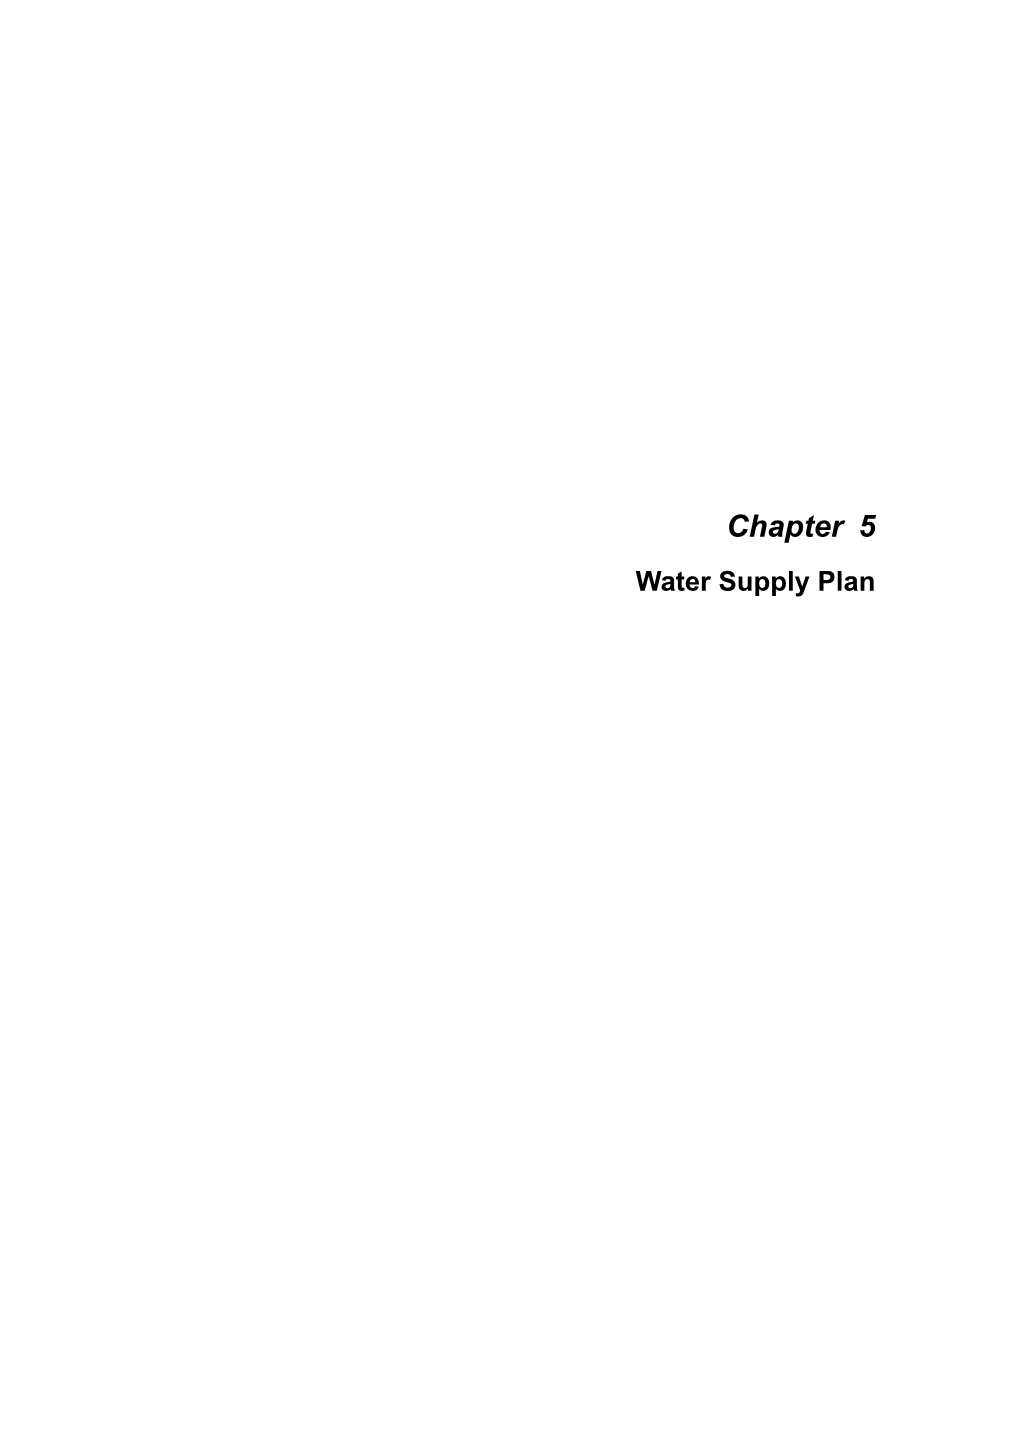 Chapter 5 Water Supply Plan